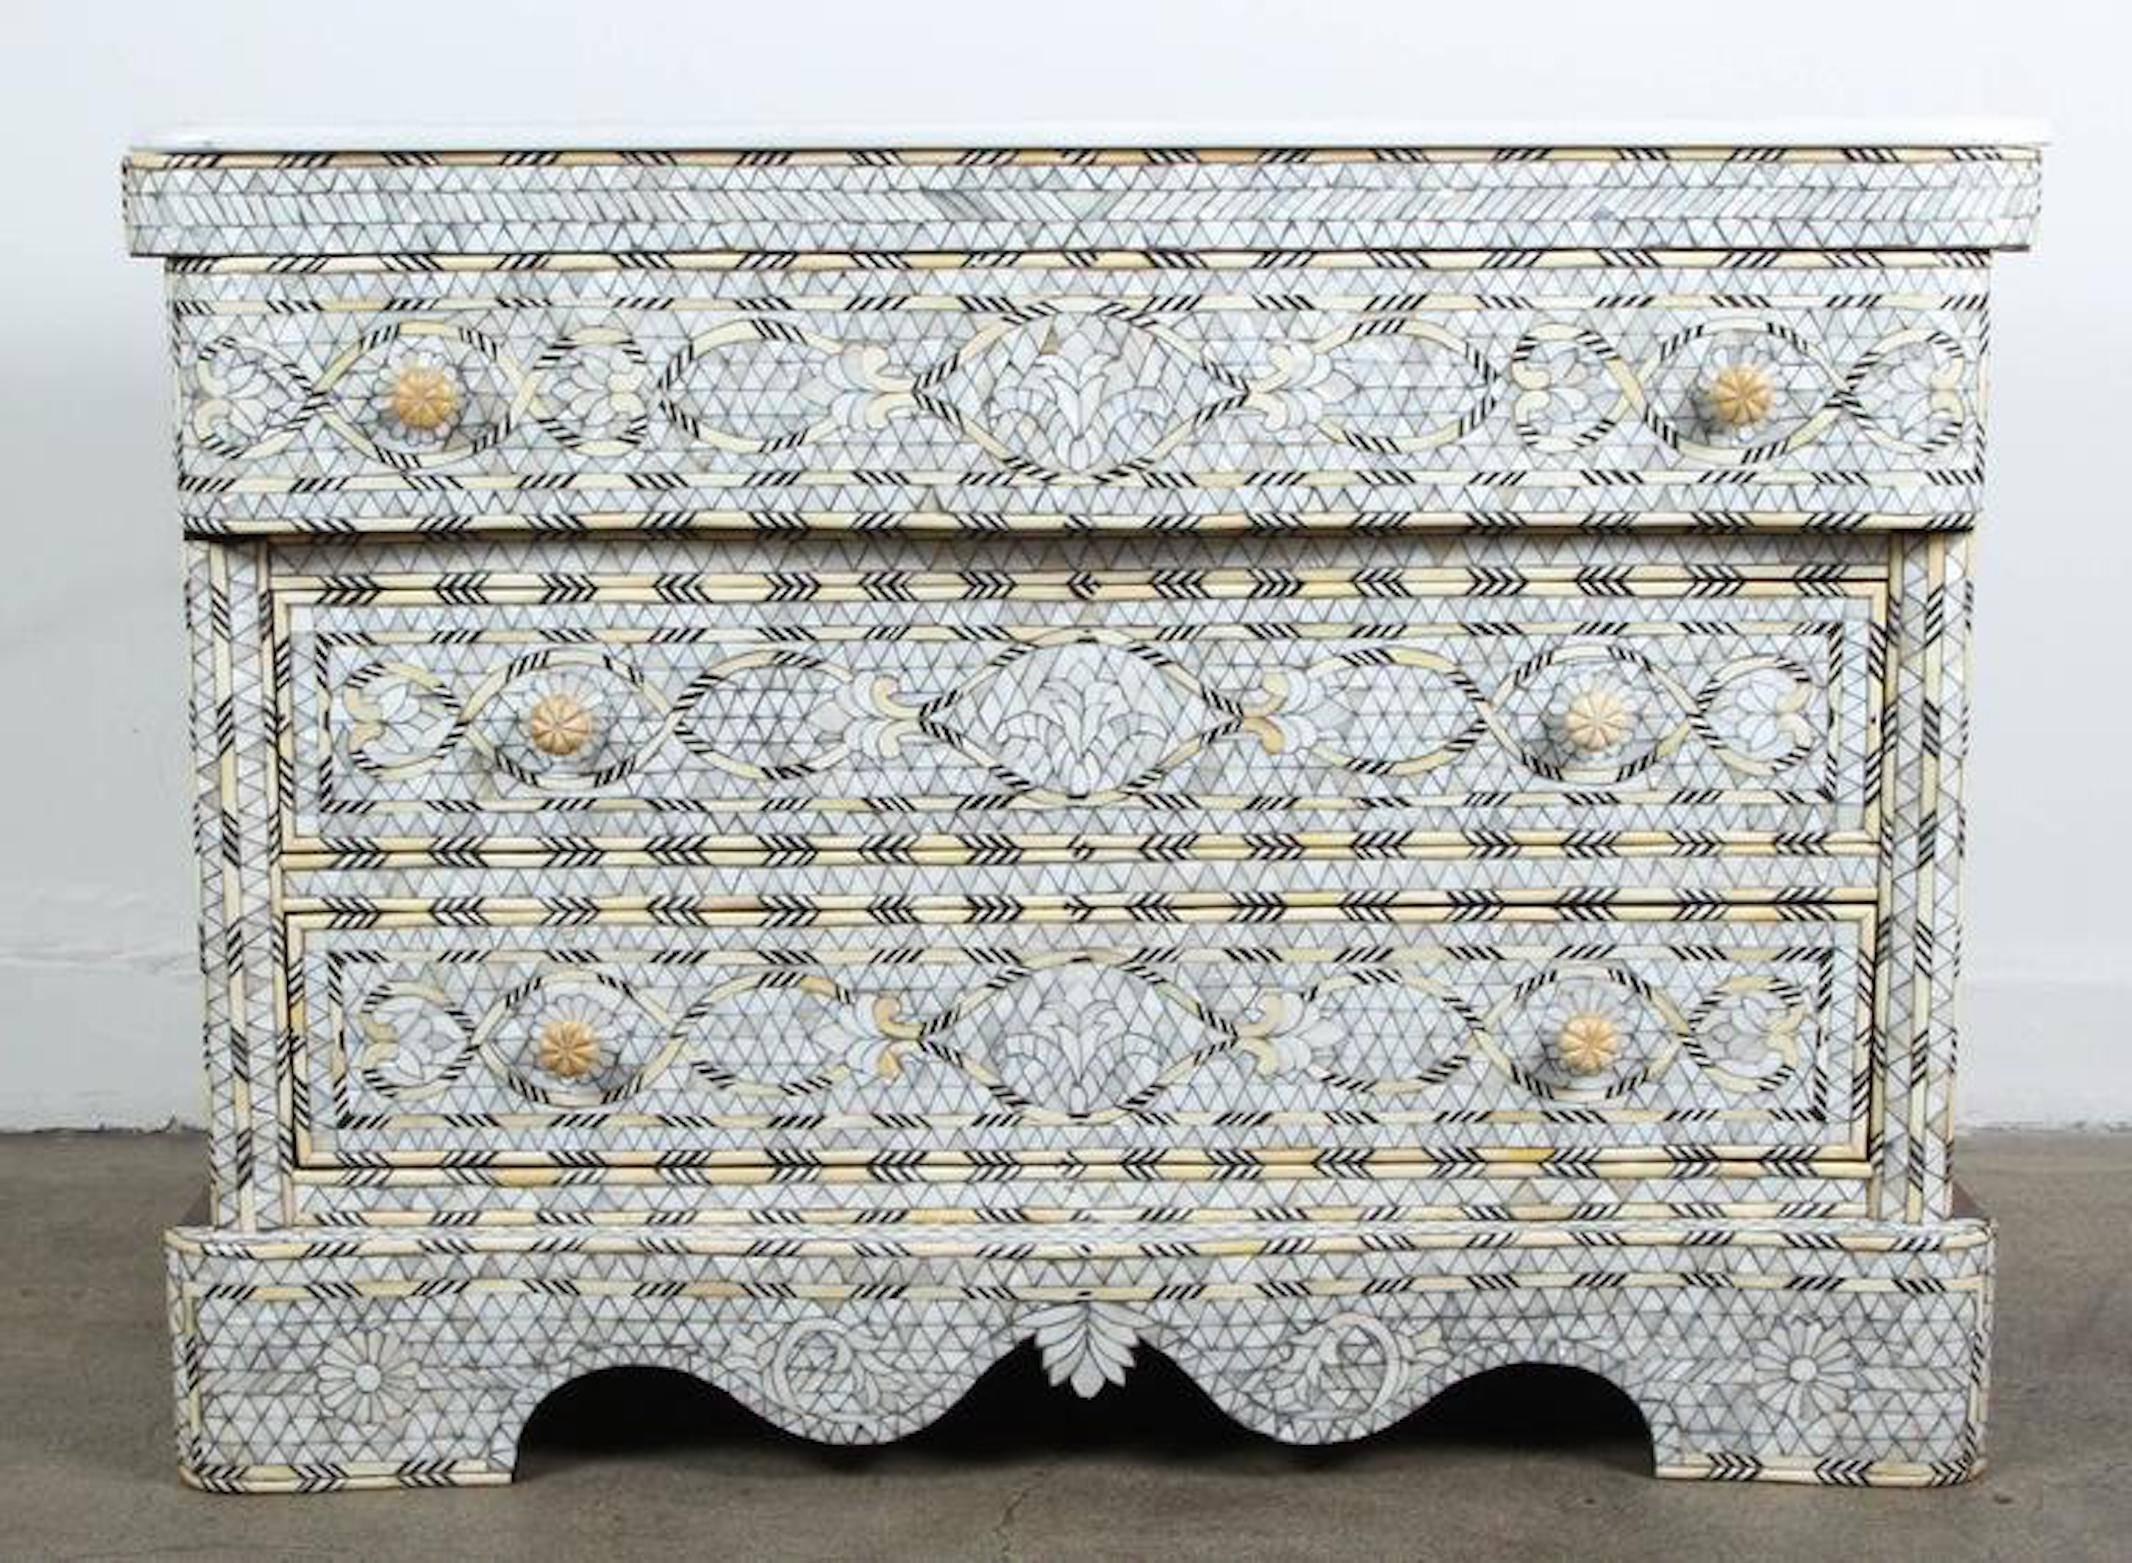 Fabulous middle Eastern Syrian artwork, handcrafted white wedding dresser with three drawers, wood inlay with mother-of-pearl, shell, ebony and bone.
Moorish arches and intricate Islamic designs.
Dowry chest of drawers heavily inlaid in front, the